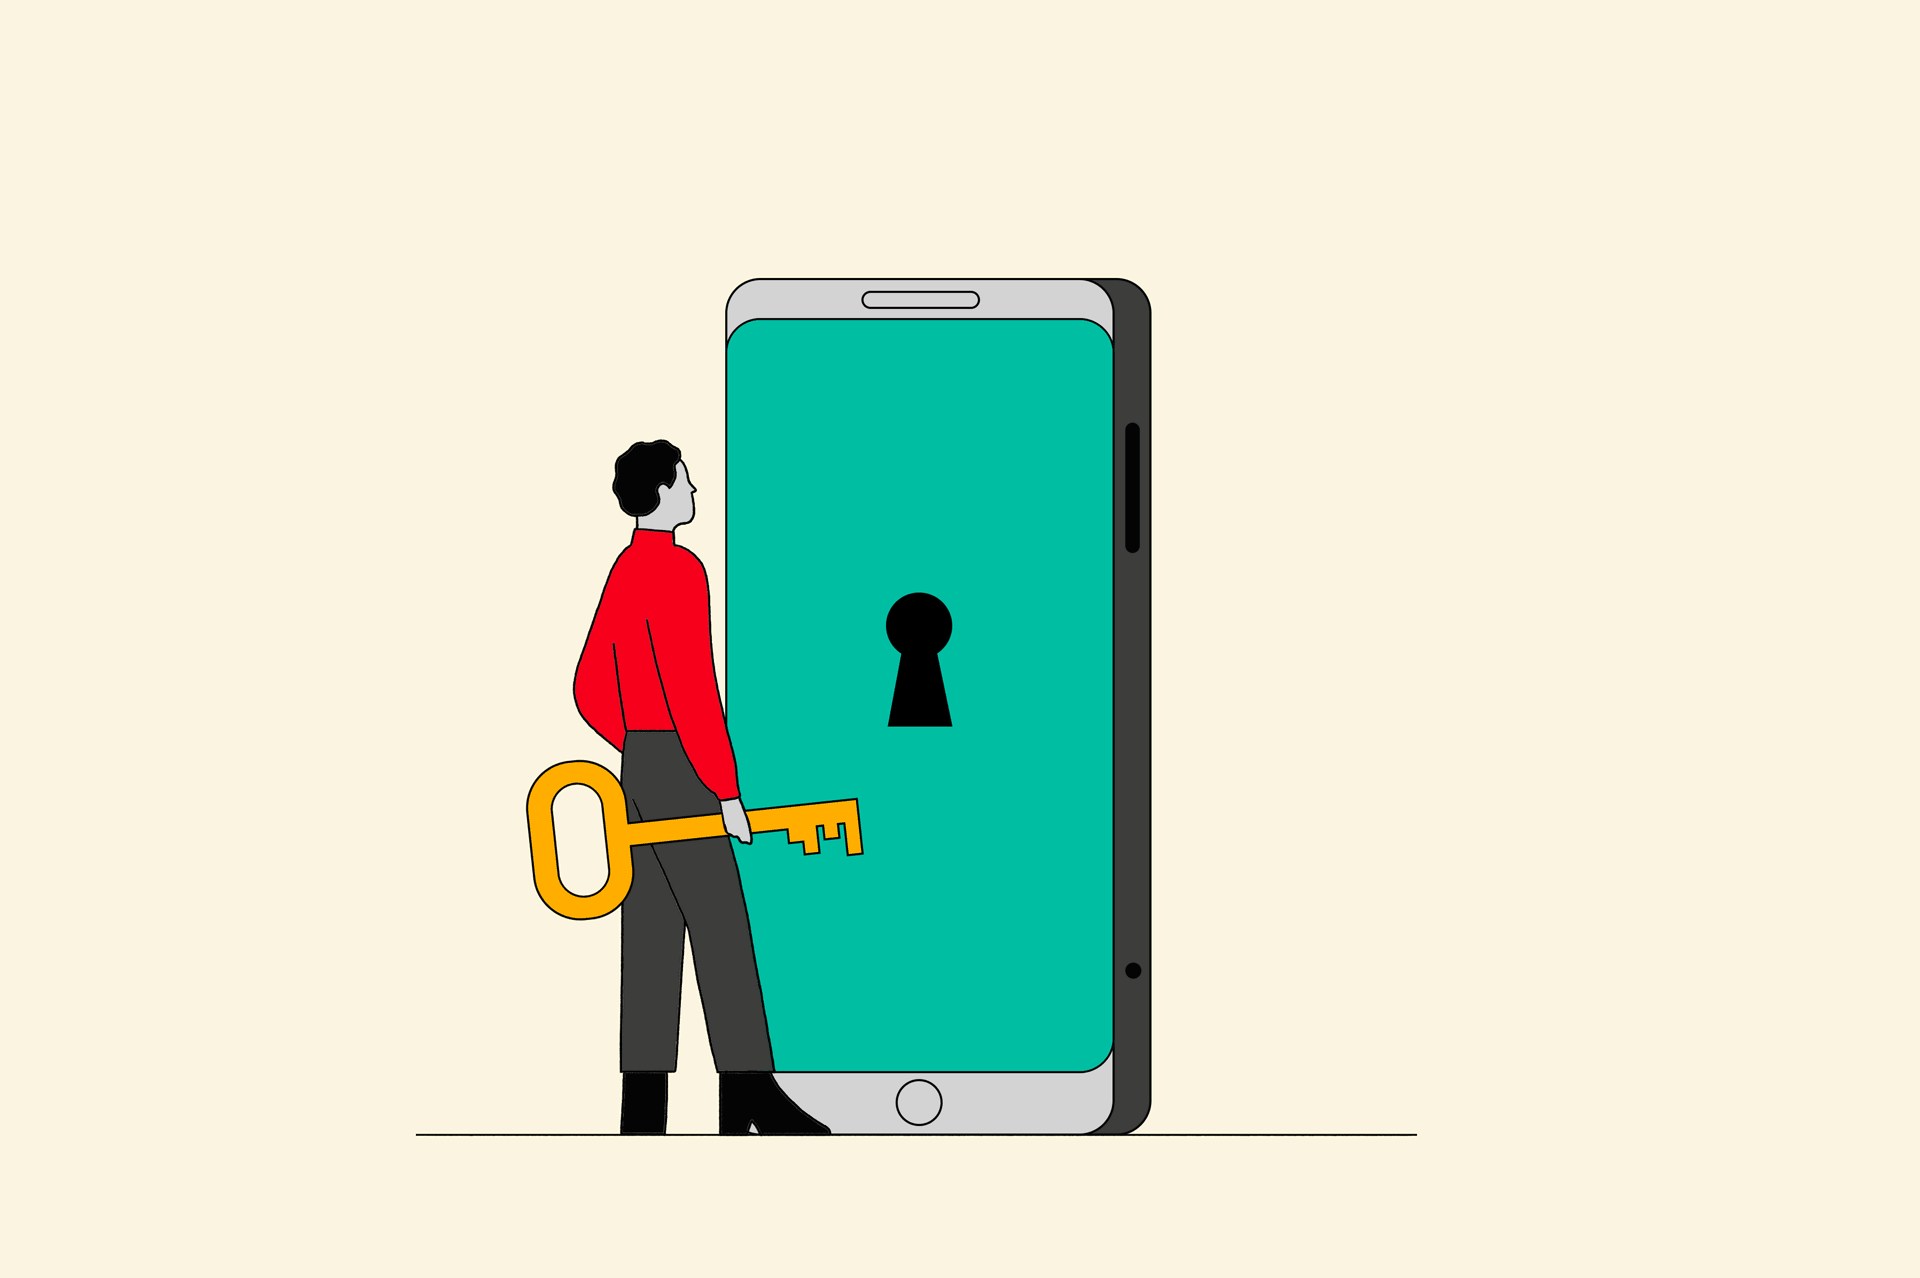 Illustration of a person unlocking a phone with a yellow key.